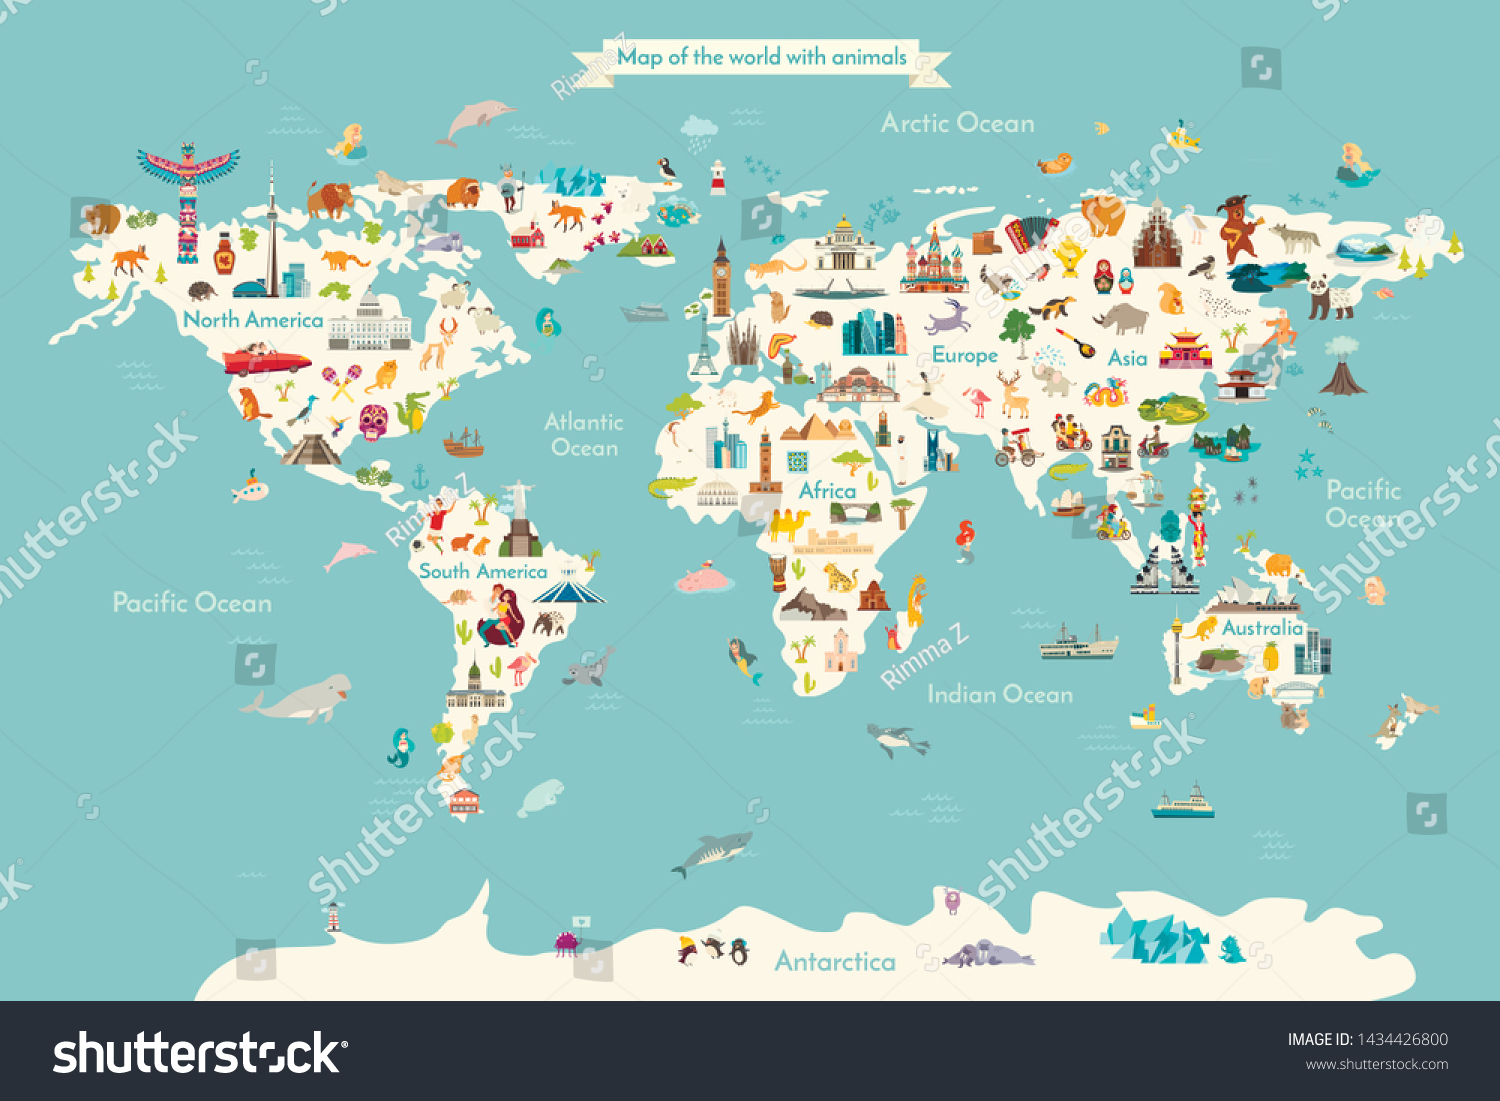 Landmarks world map vector crtoon illustration. Cartoon globe vector illustration. landmarks, signs, animals of countries and continents. Abstract map for learning. Poster, picture, card